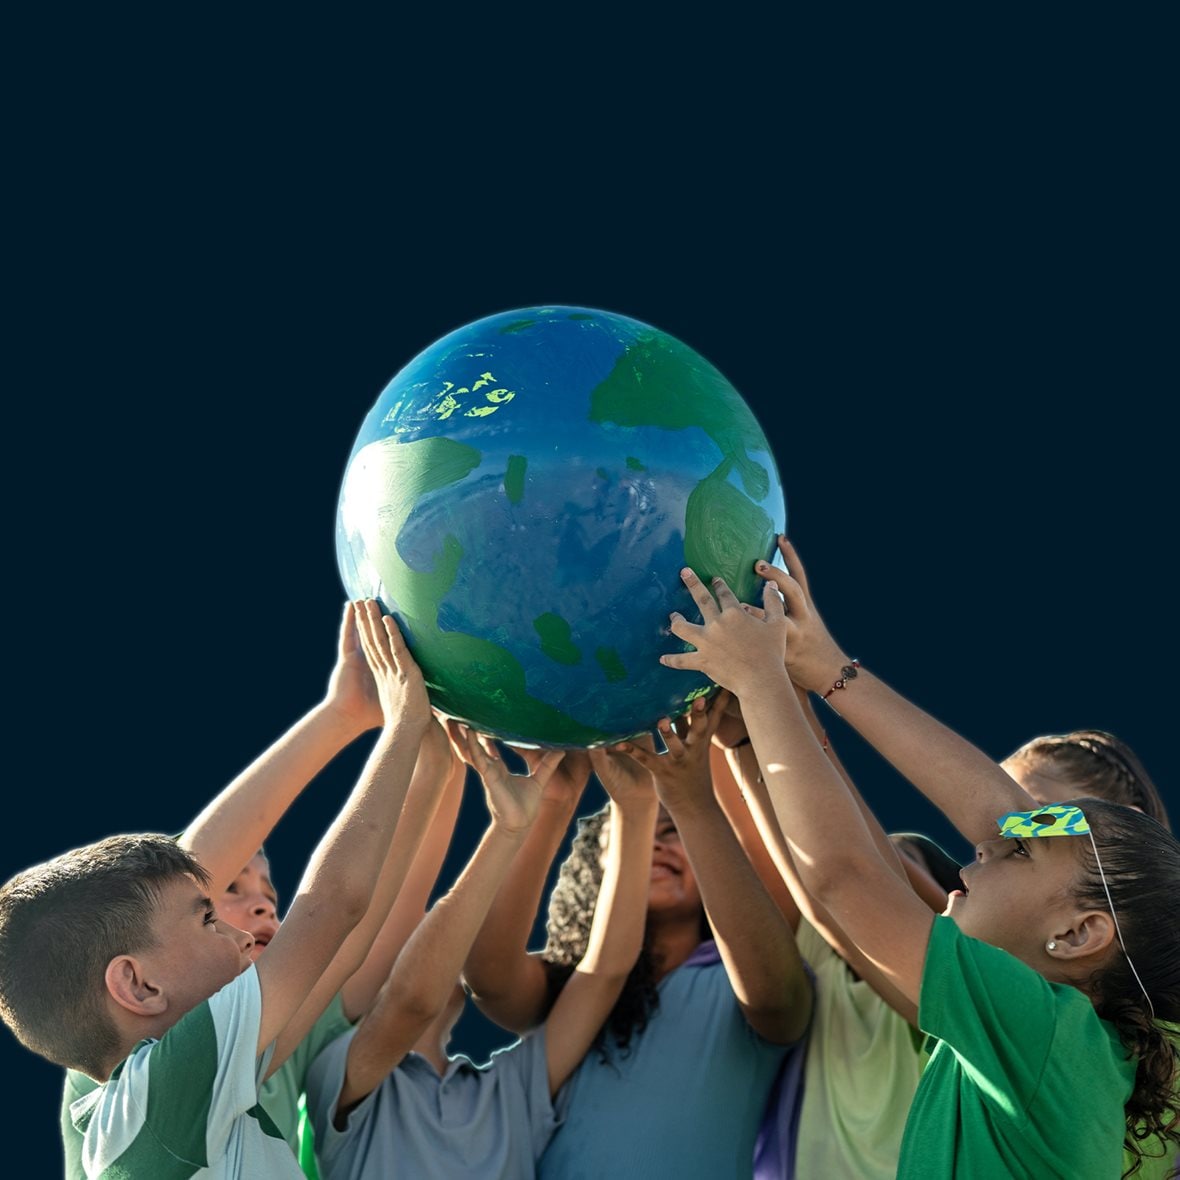 Children holding a planet outdoors - stock photo